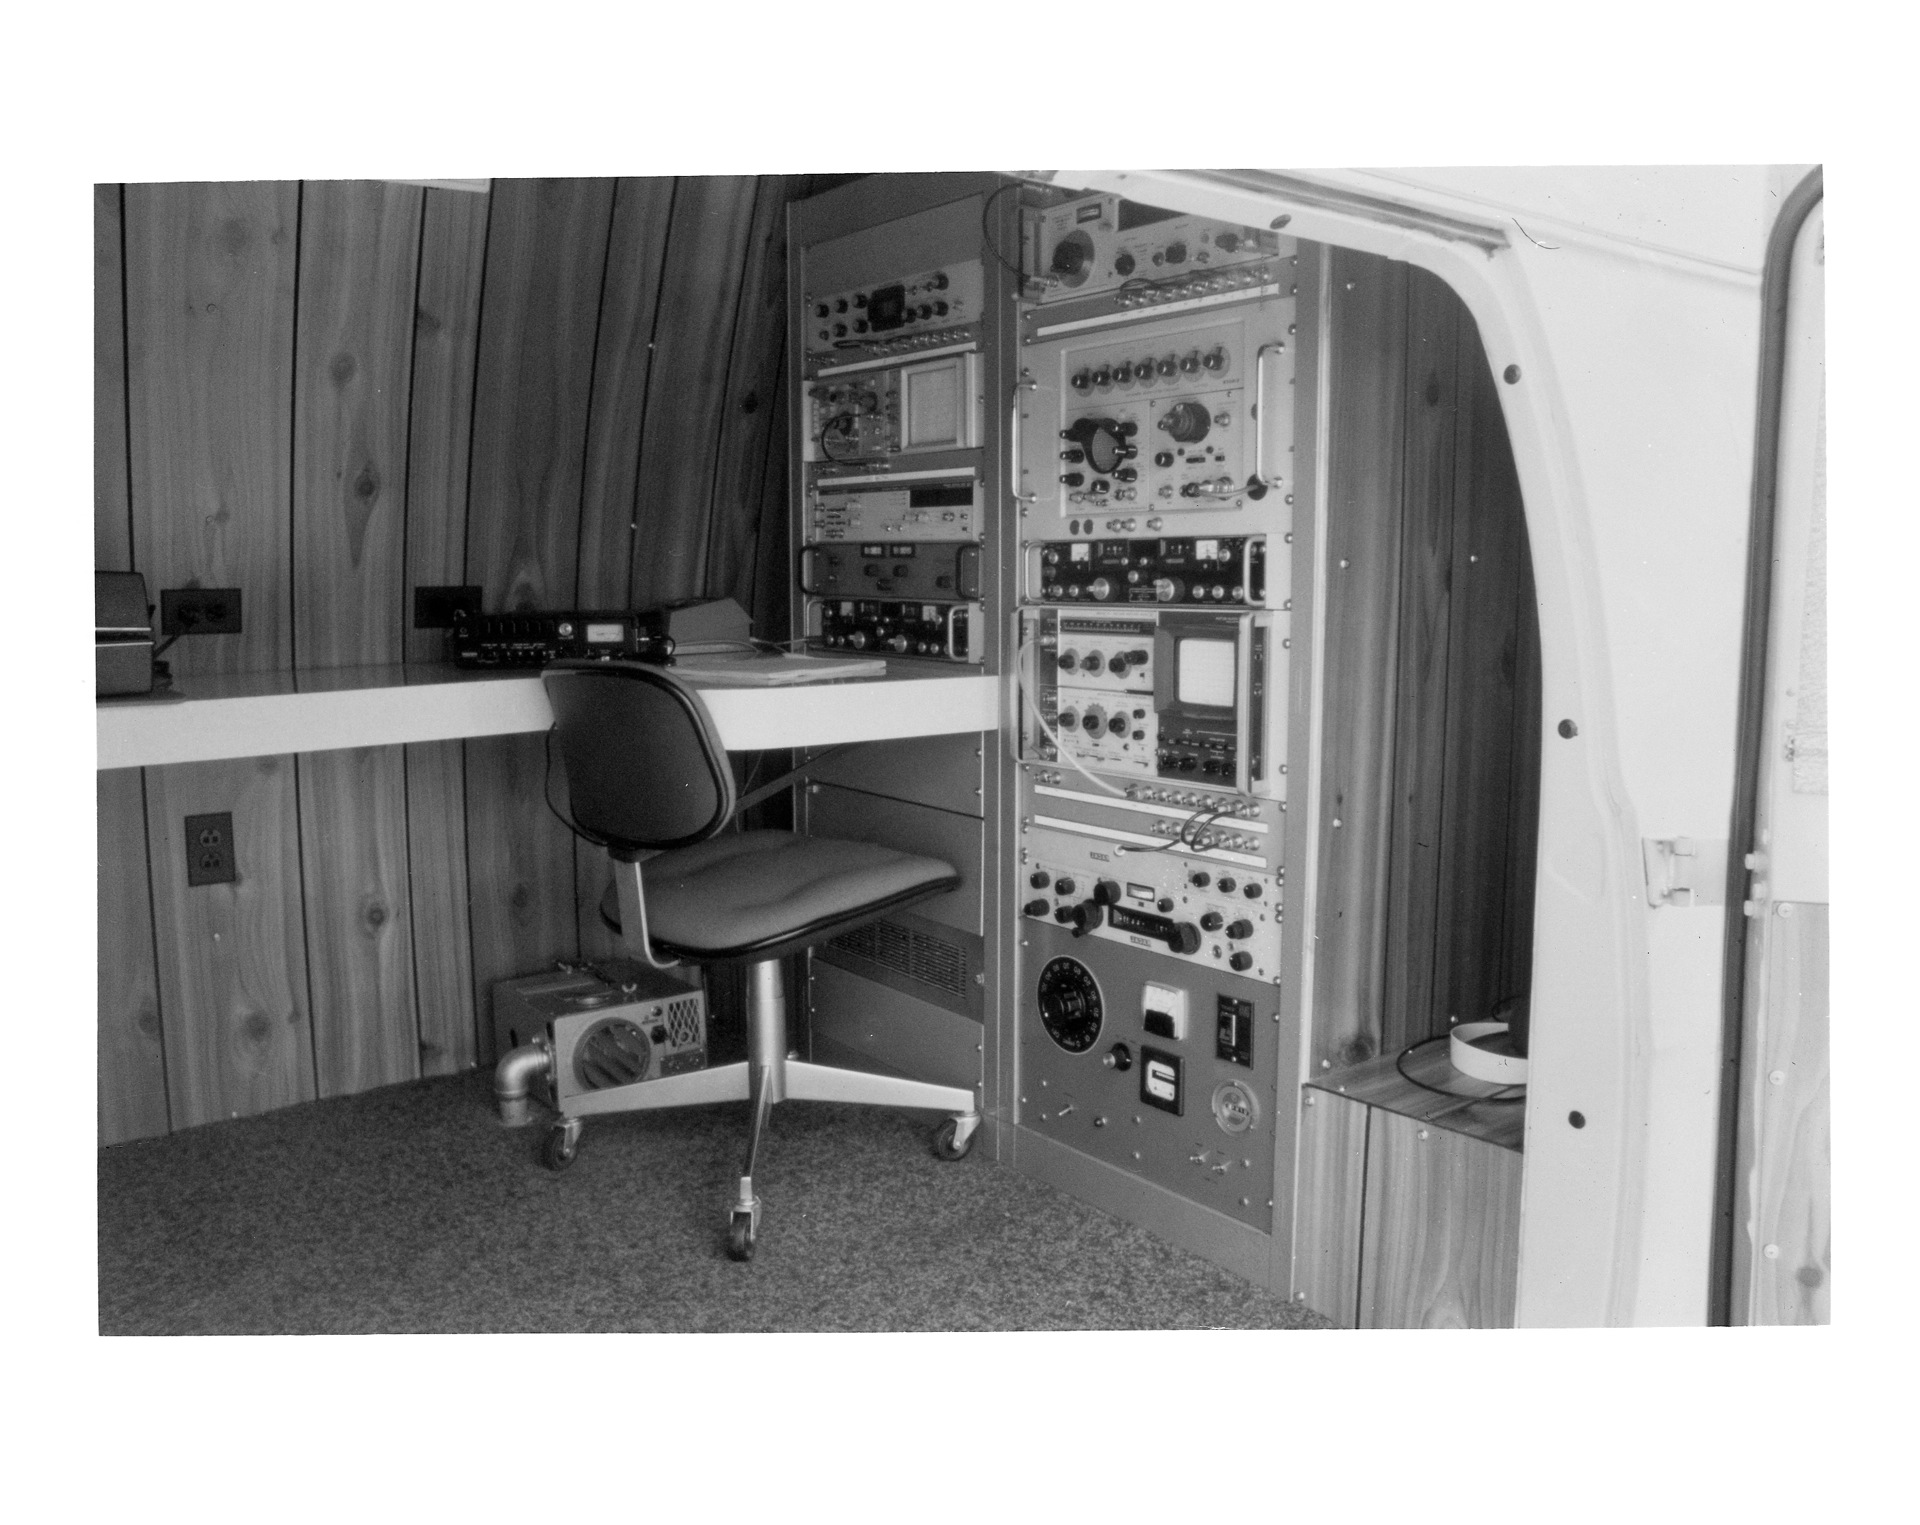 Interior of van used in Green Bank to locate RFI signals